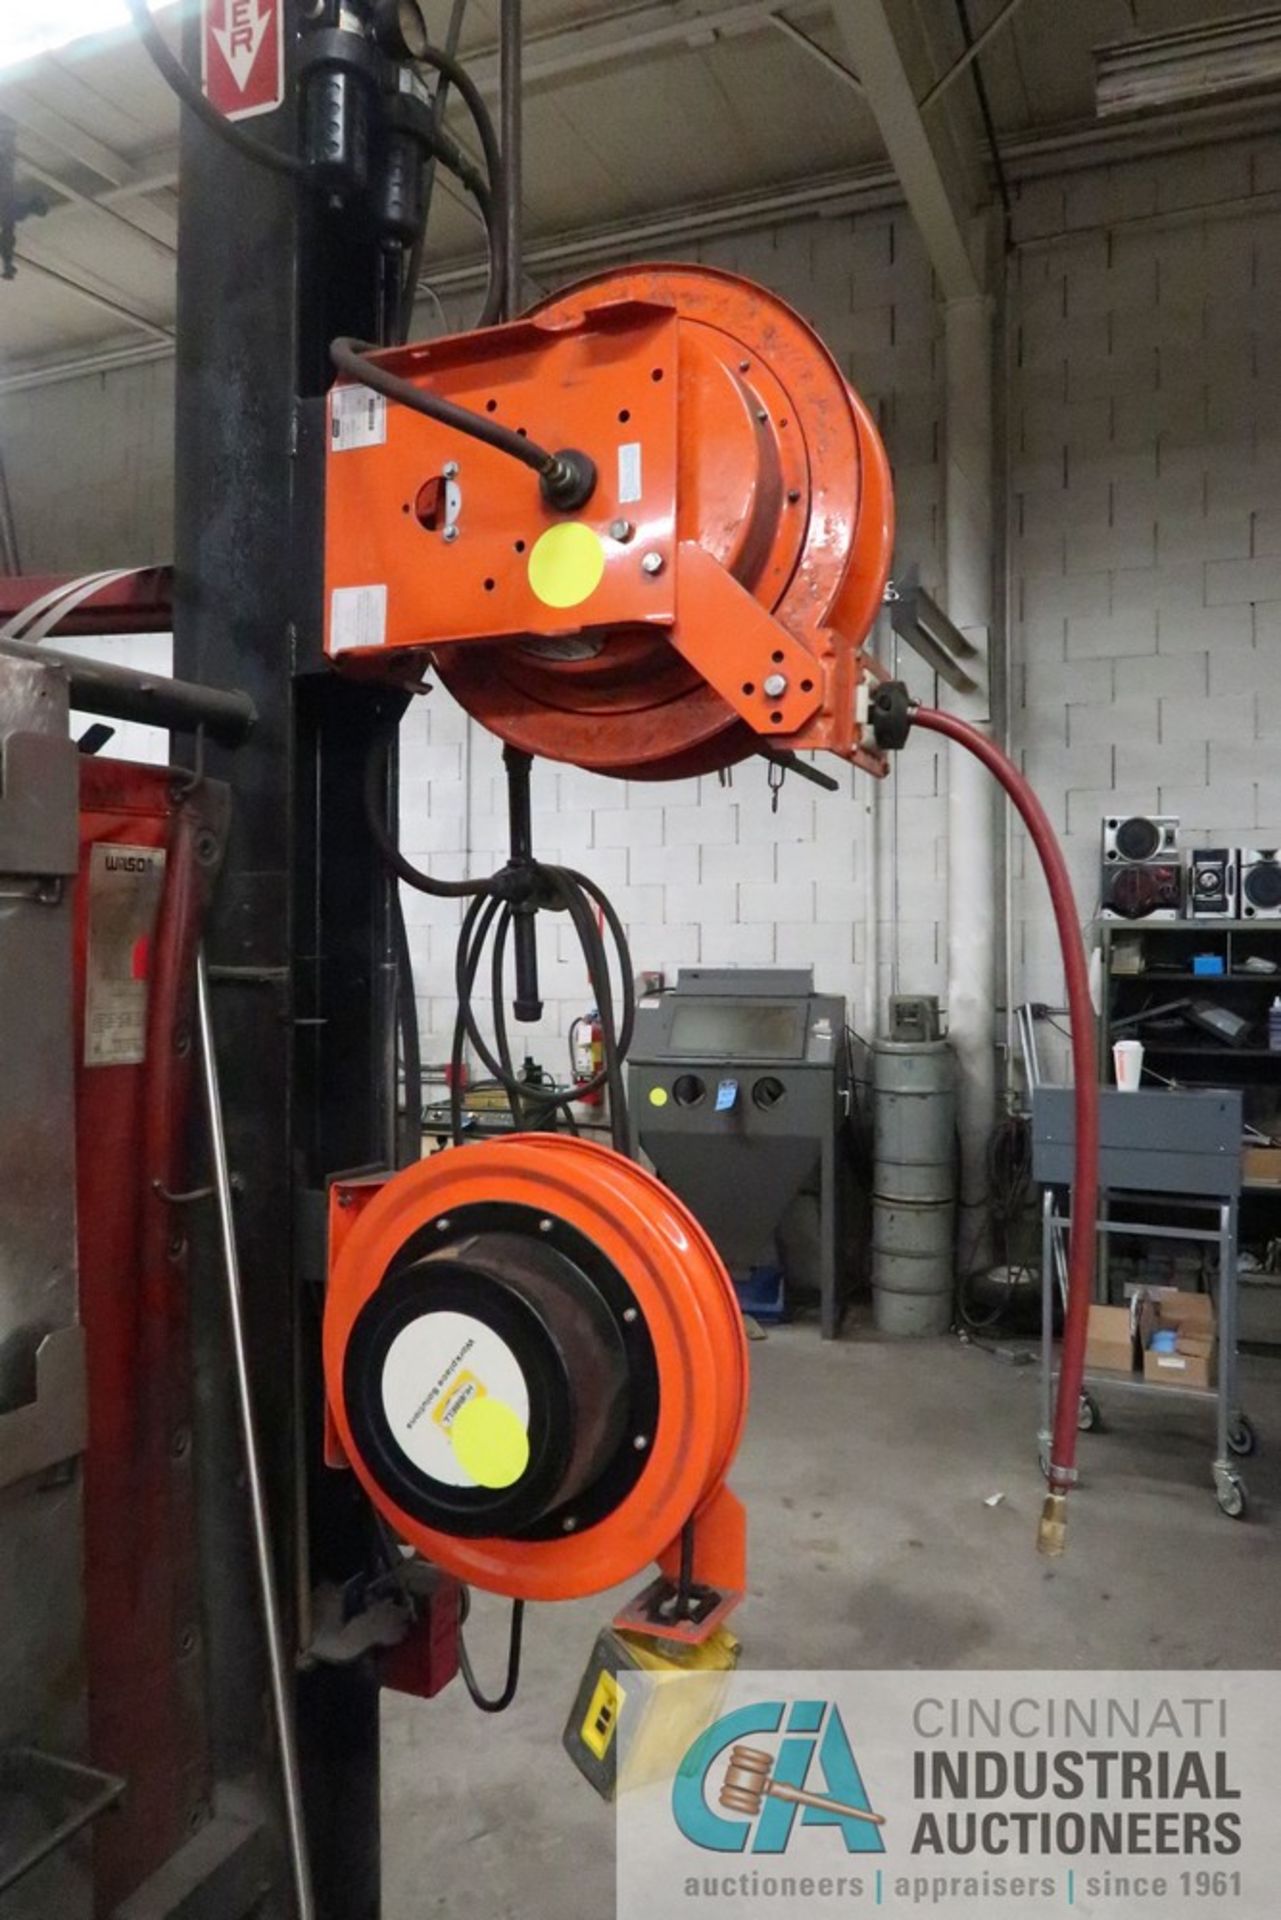 (LOT) (8) AIR HOSE REELS, (2) ELECTRIC CORD REELS - LOCATED IN SHIPPING, WELD SHOP AND FAB SHOP - Image 3 of 5